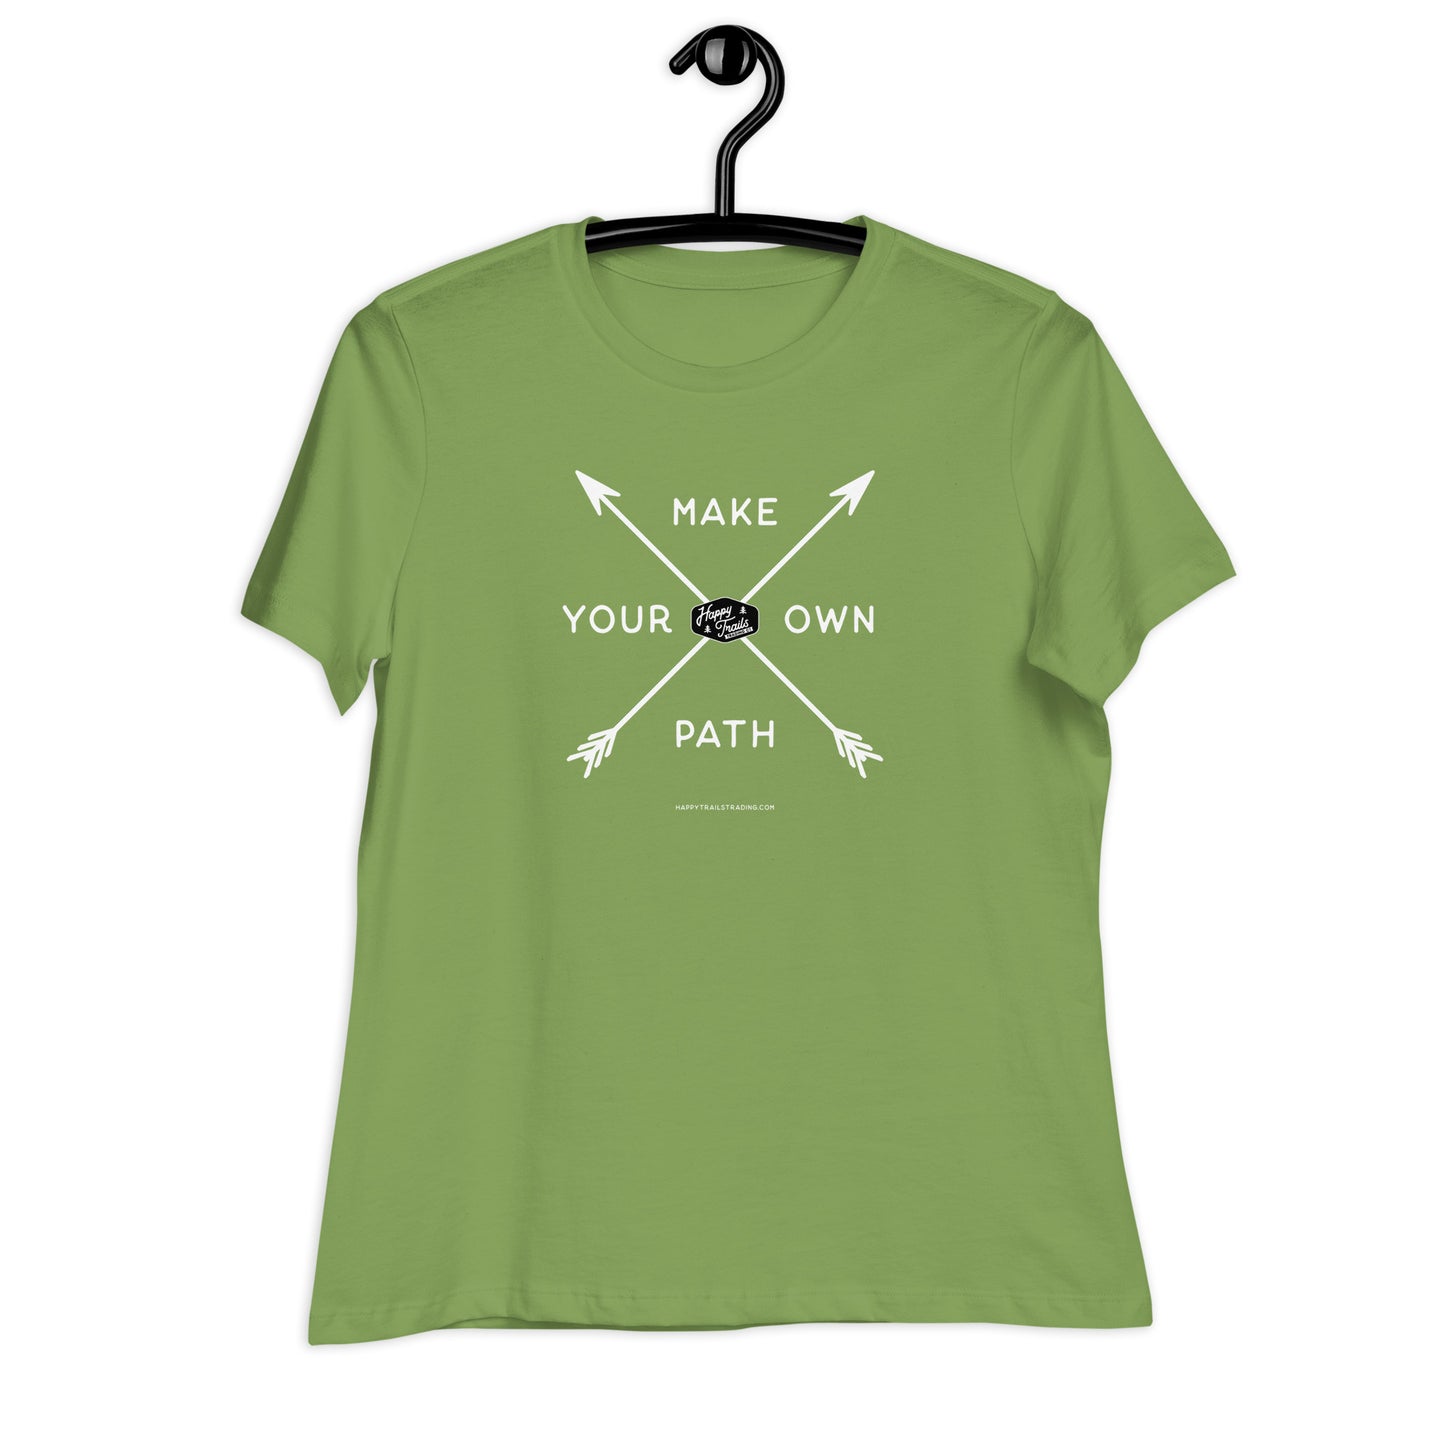 Make Your Own Path - Women's Relaxed T-Shirt